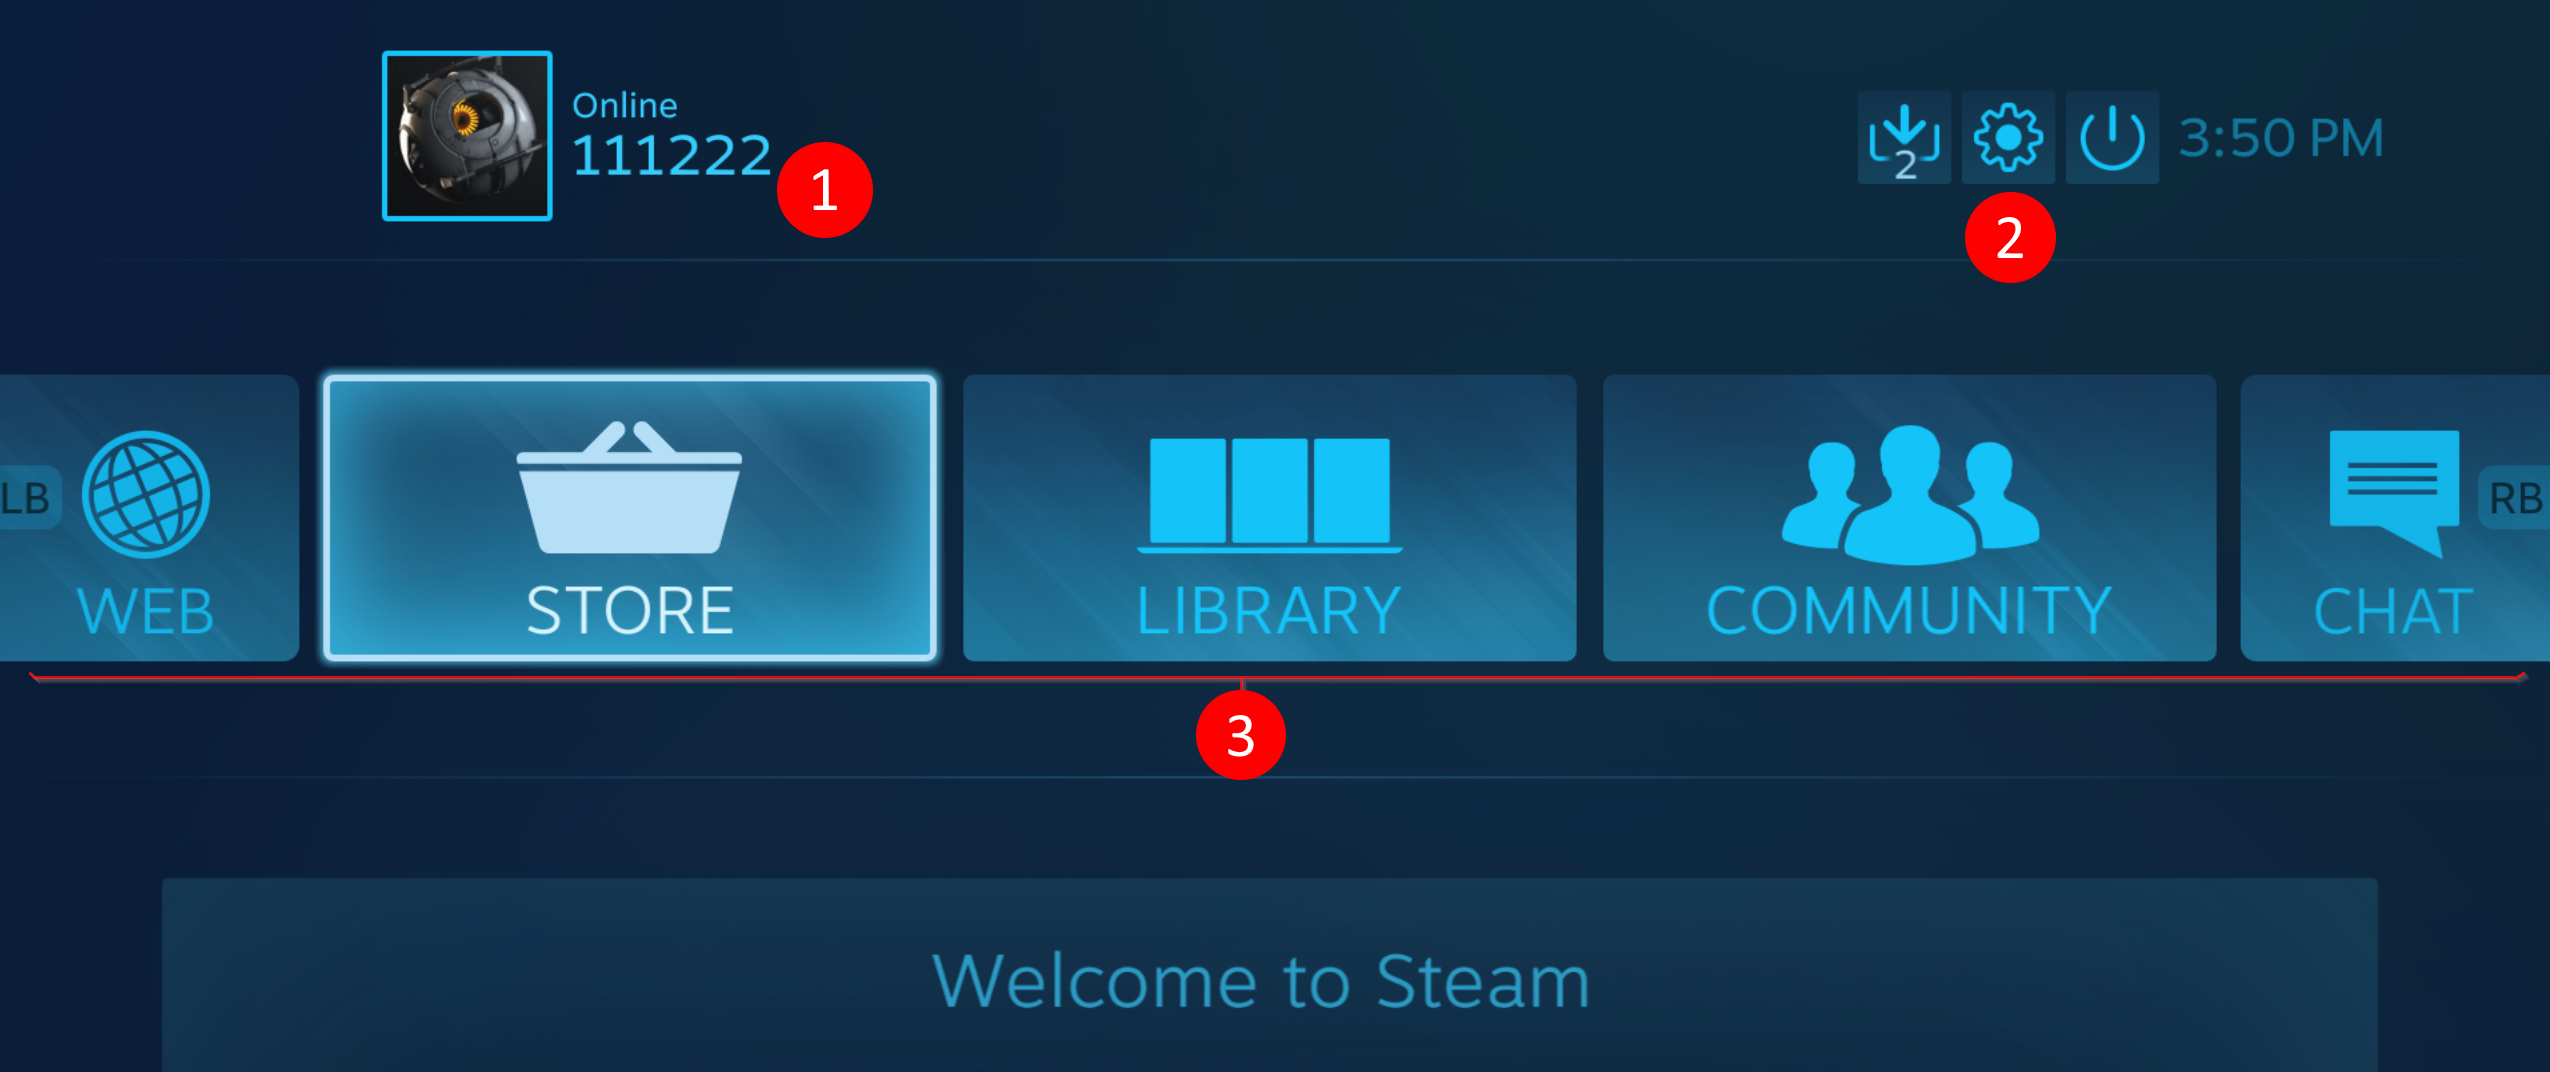 from steam profile bg) Is there a way to get the document about